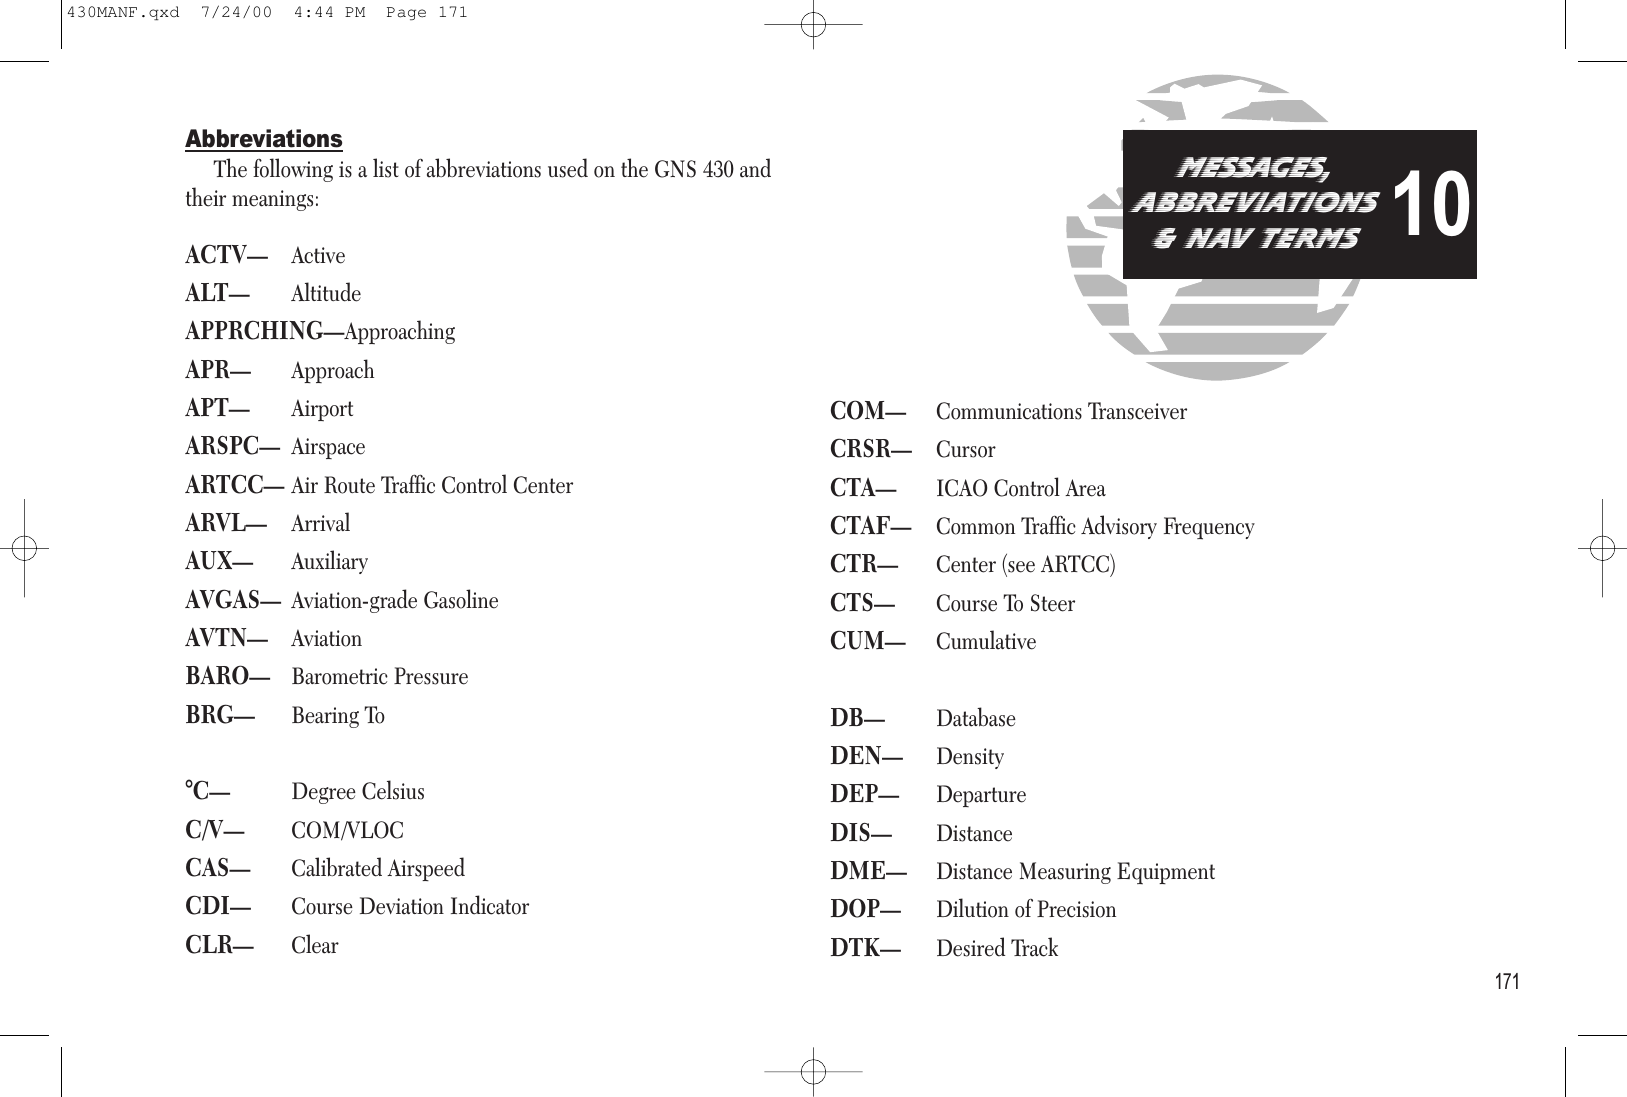 AbbreviationsThe following is a list of abbreviations used on the GNS 430 andtheir meanings:ACTV—ActiveALT—AltitudeAPPRCHING—ApproachingAPR—ApproachAPT—AirportARSPC—AirspaceARTCC—Air Route Traffic Control CenterARVL—ArrivalAUX—AuxiliaryAVGAS—Aviation-grade GasolineAVTN—AviationBARO—Barometric PressureBRG—Bearing To°C—Degree CelsiusC/V—COM/VLOCCAS—Calibrated AirspeedCDI—Course Deviation IndicatorCLR—ClearCOM—Communications TransceiverCRSR—CursorCTA—ICAO Control AreaCTAF—Common Traffic Advisory FrequencyCTR—Center (see ARTCC)CTS—Course To SteerCUM—CumulativeDB—DatabaseDEN—DensityDEP—DepartureDIS—DistanceDME—Distance Measuring EquipmentDOP—Dilution of PrecisionDTK—Desired Track171MESSAGES,aBBREVIATIONS&amp; nav tERMS10430MANF.qxd  7/24/00  4:44 PM  Page 171